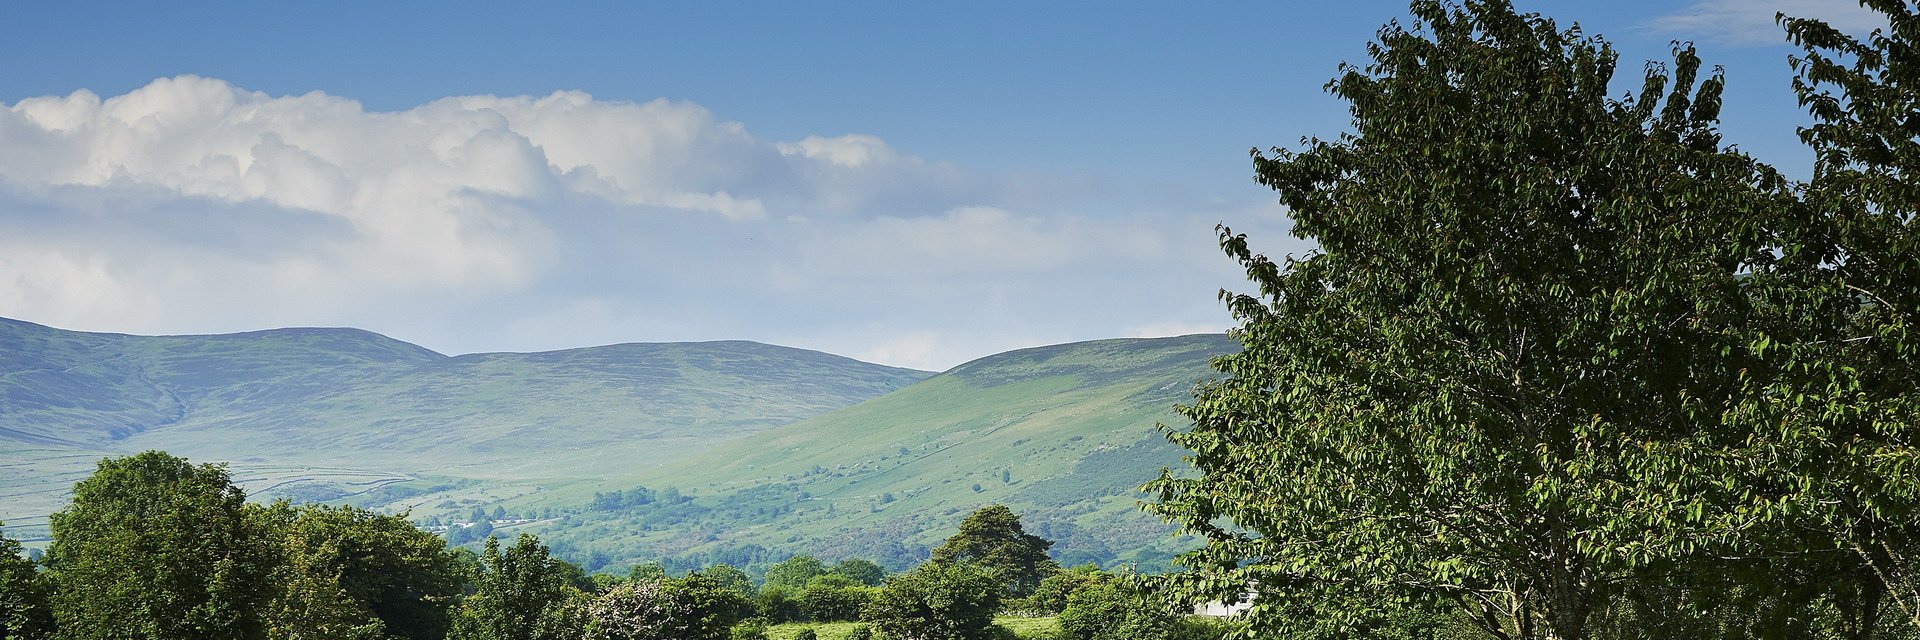 Cooley Mountains